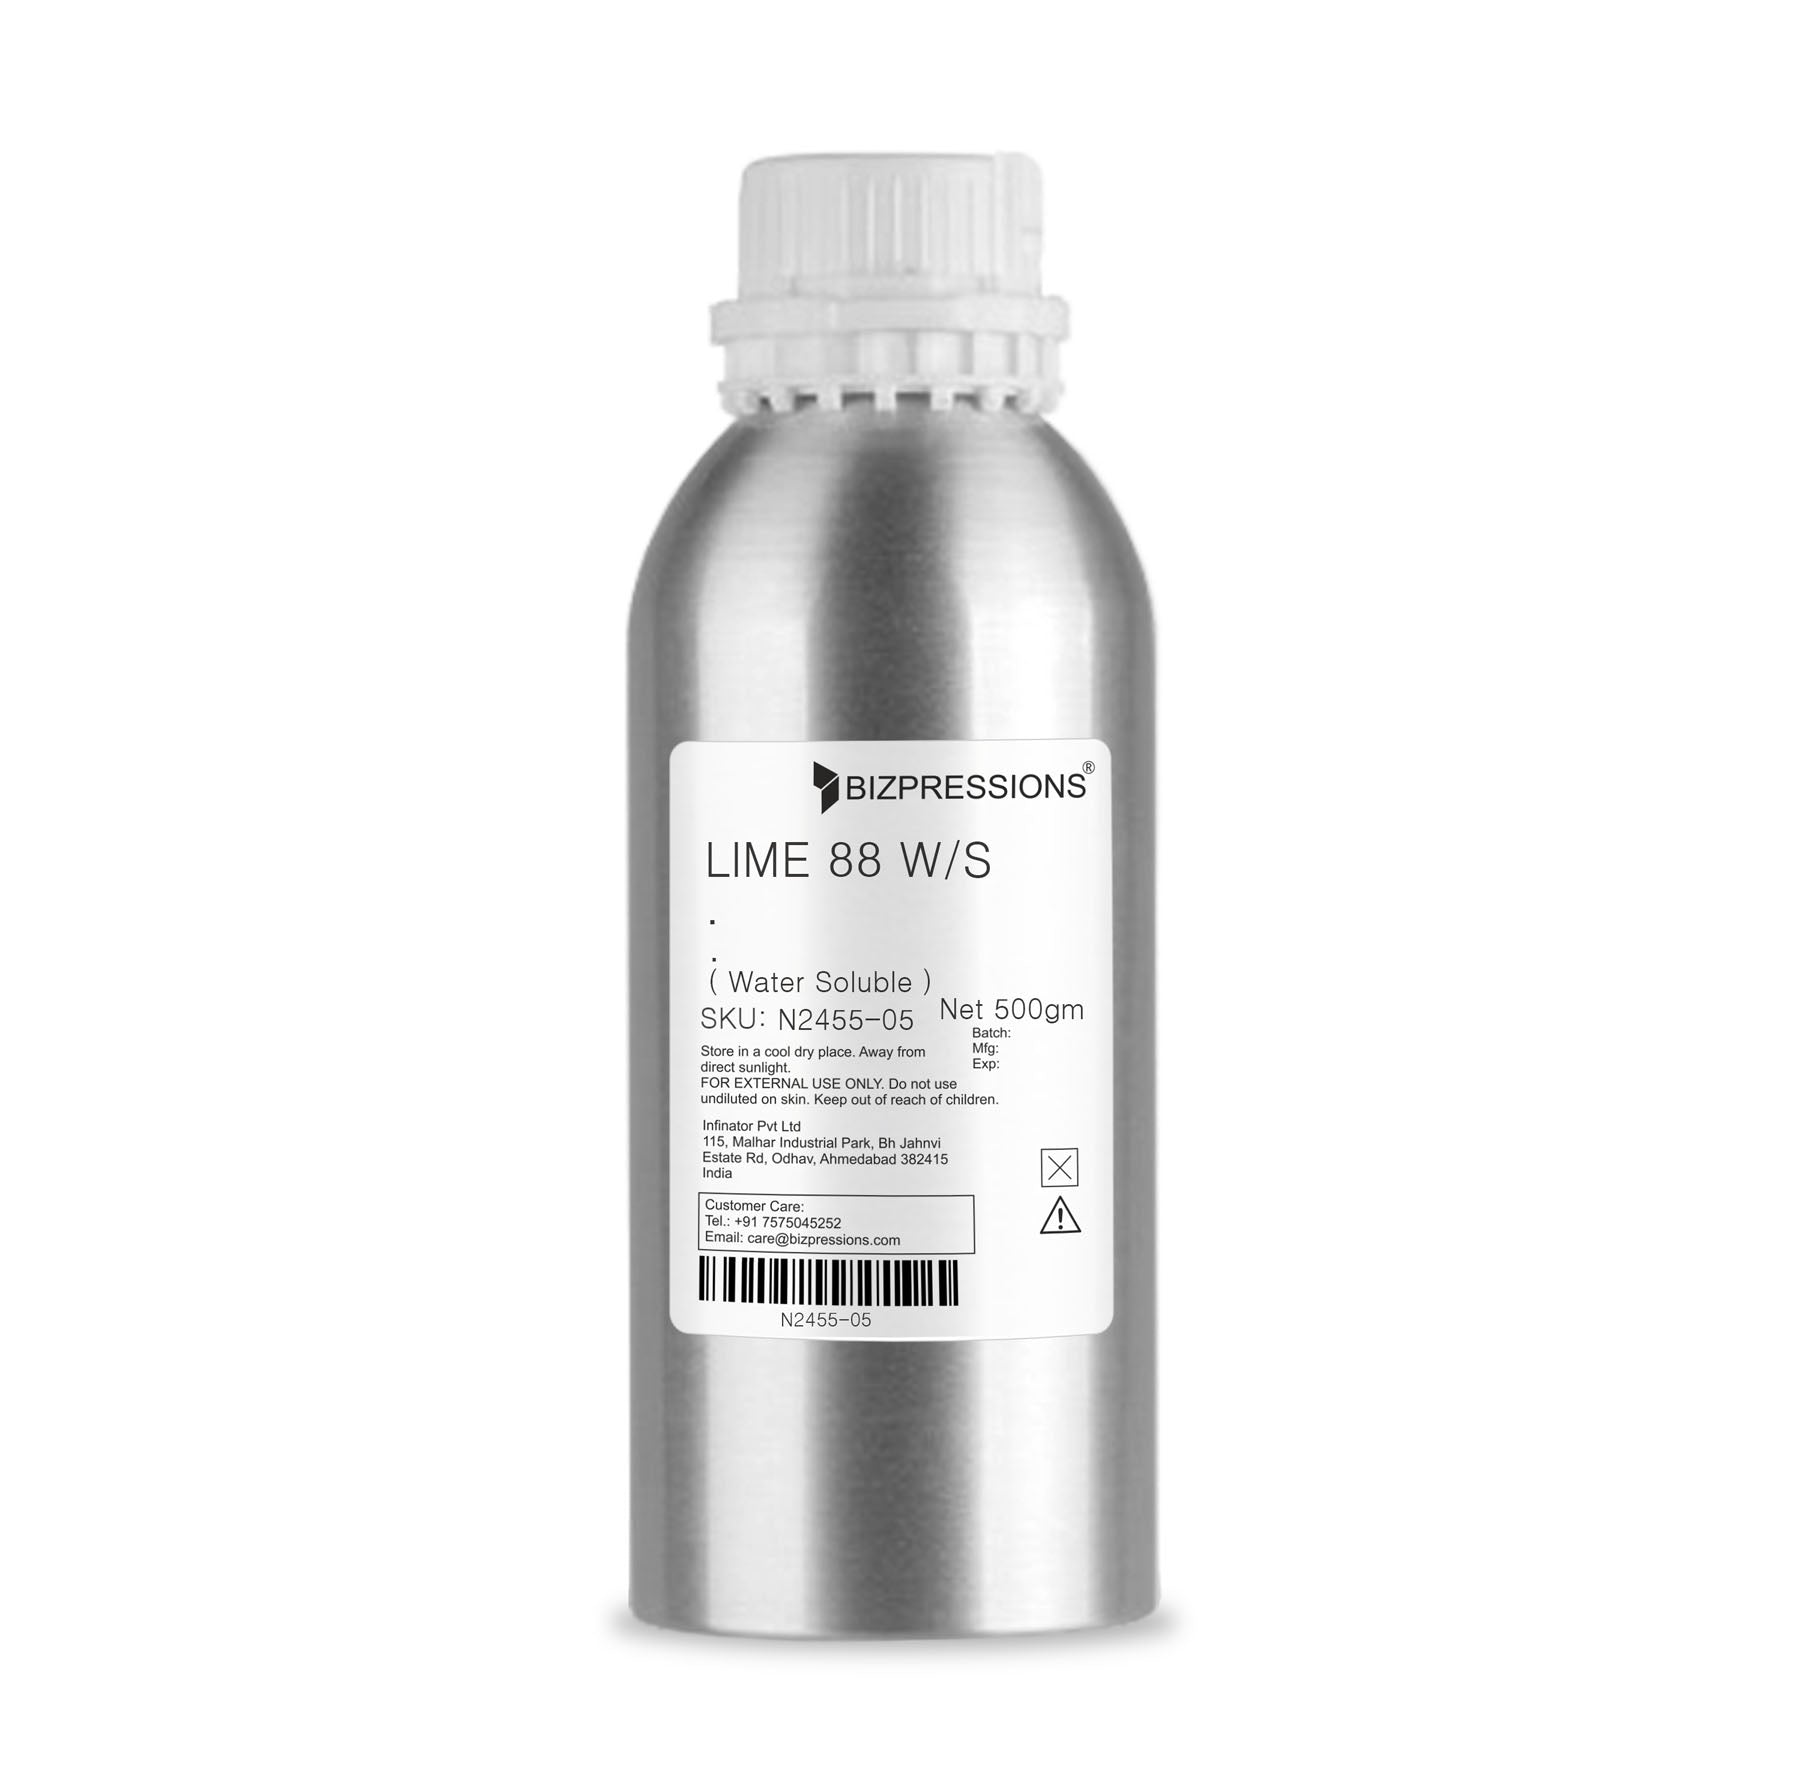 LIME 88 W/S - Fragrance ( Water Soluble ) - 500 gm